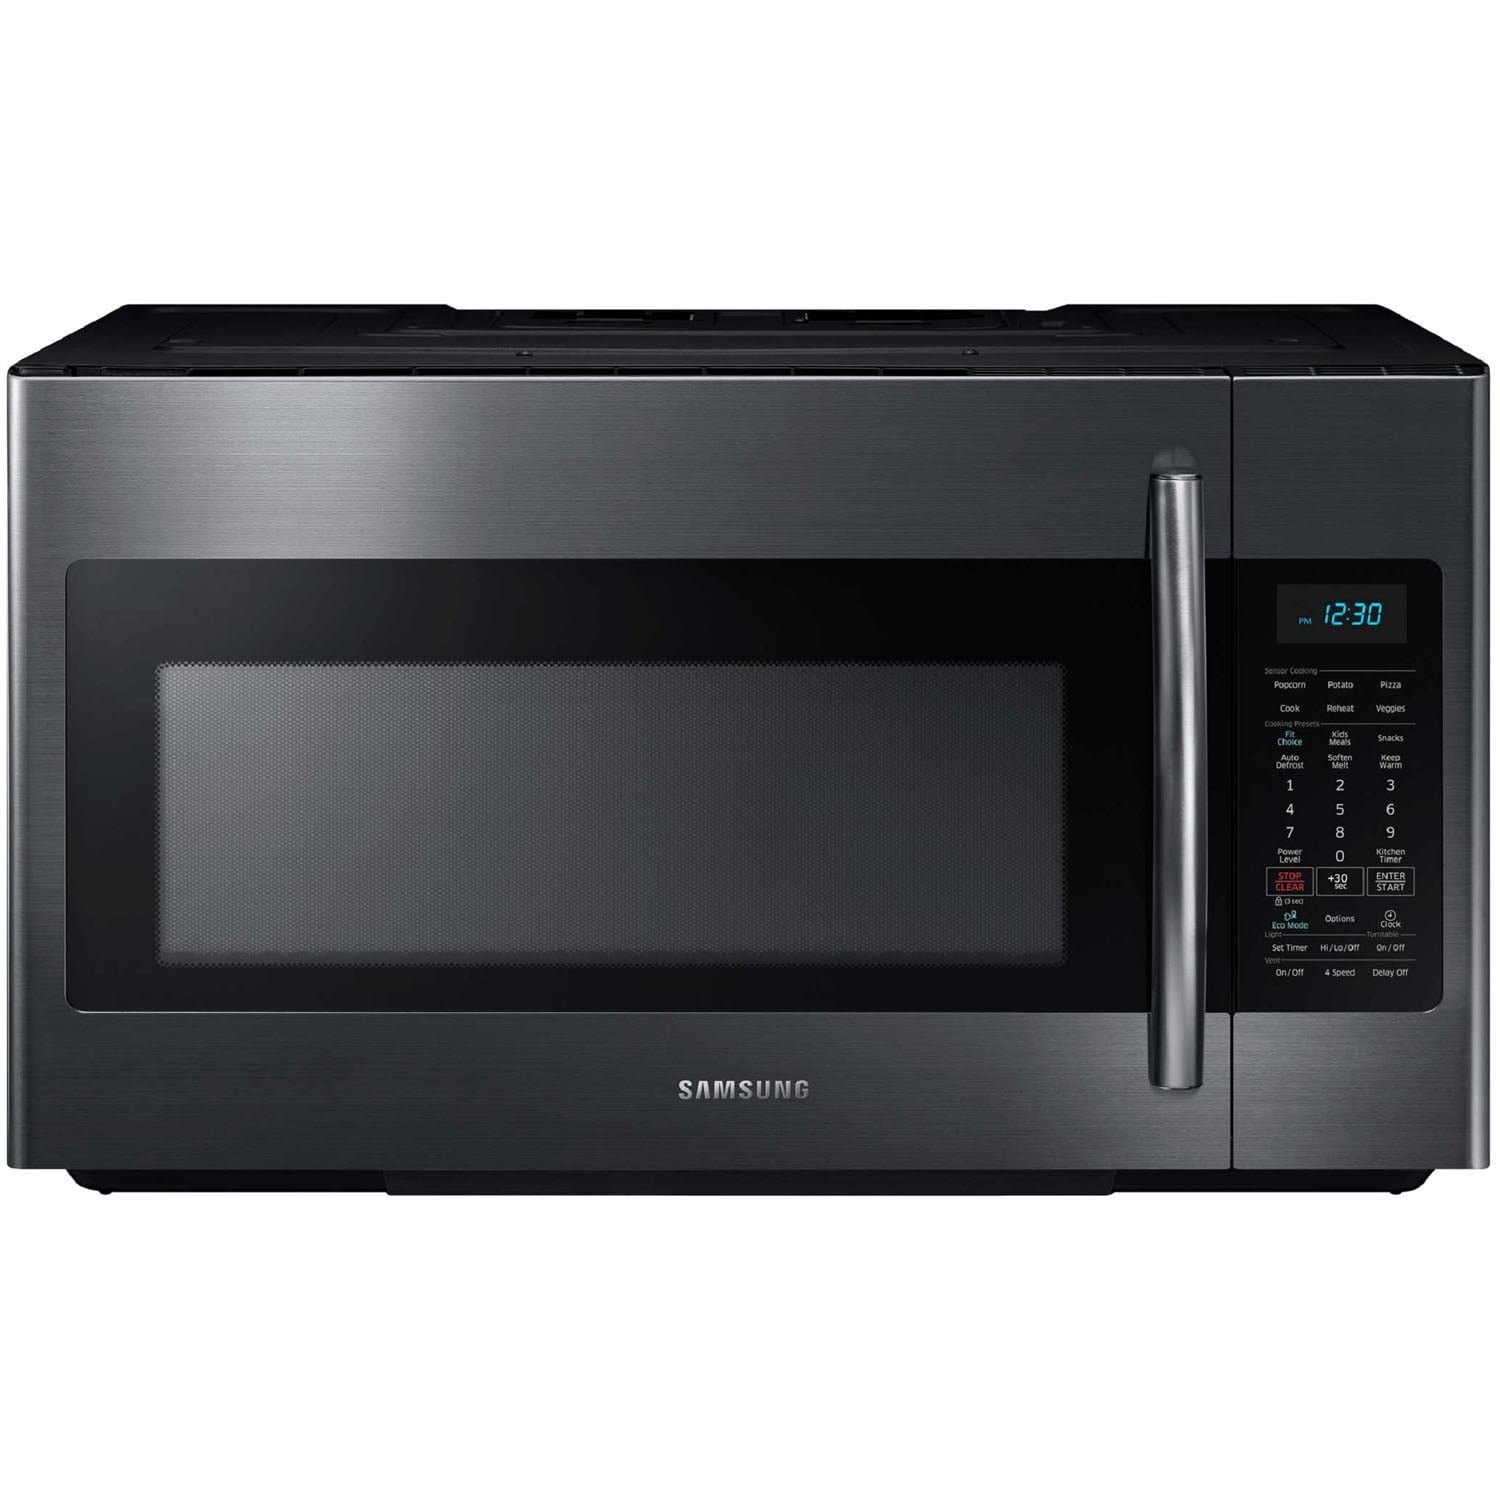 Samsung 1.8 Cu. Ft. Over-the-Range Microwave - Black Stainless